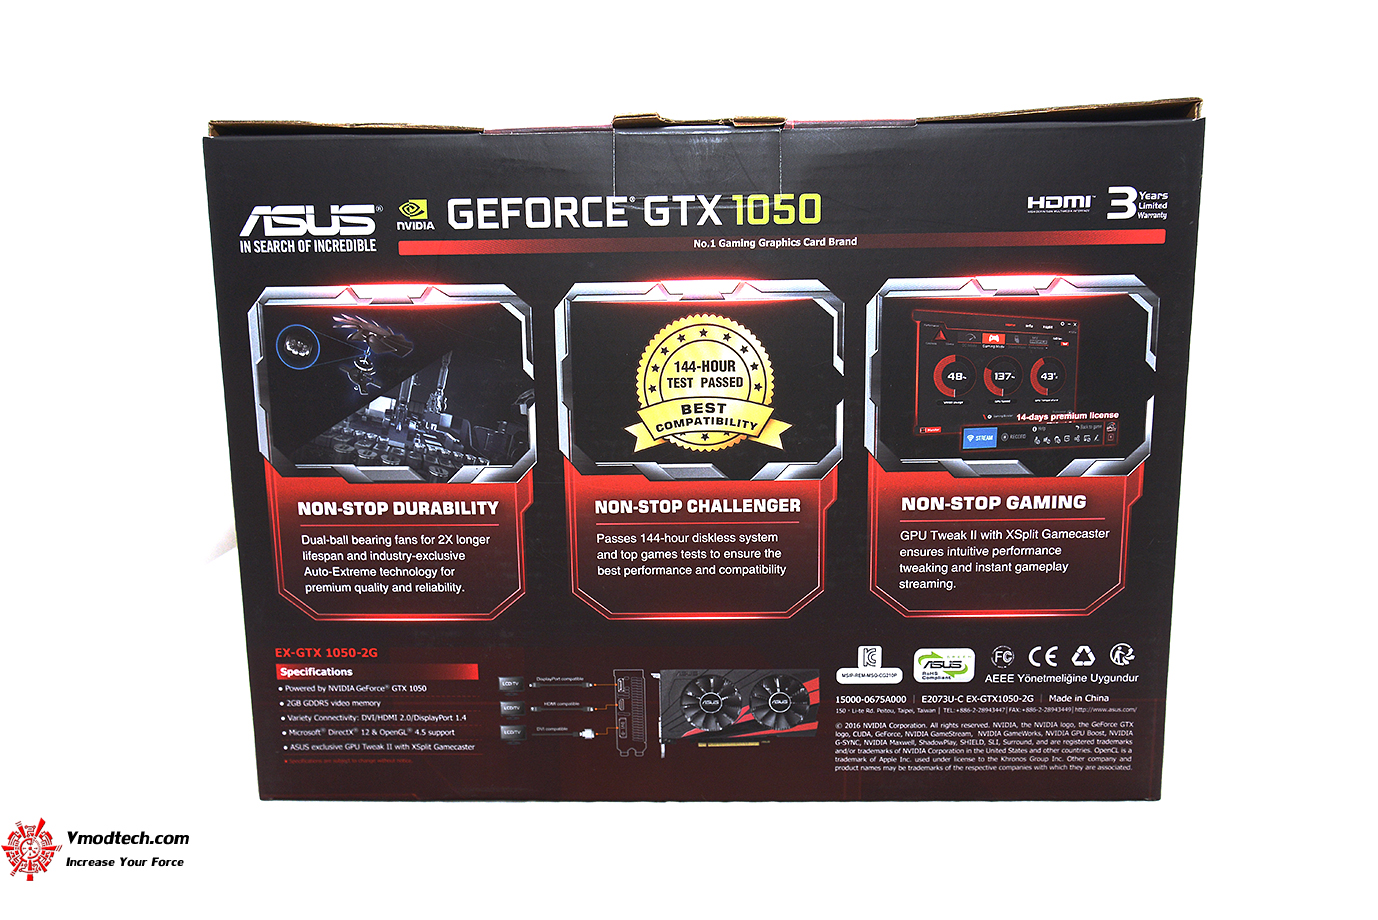 dsc 8770 ASUS EXPEDITION GeForce GTX 1050 eSports Gaming Graphics Card 2GB GDDR5 Review